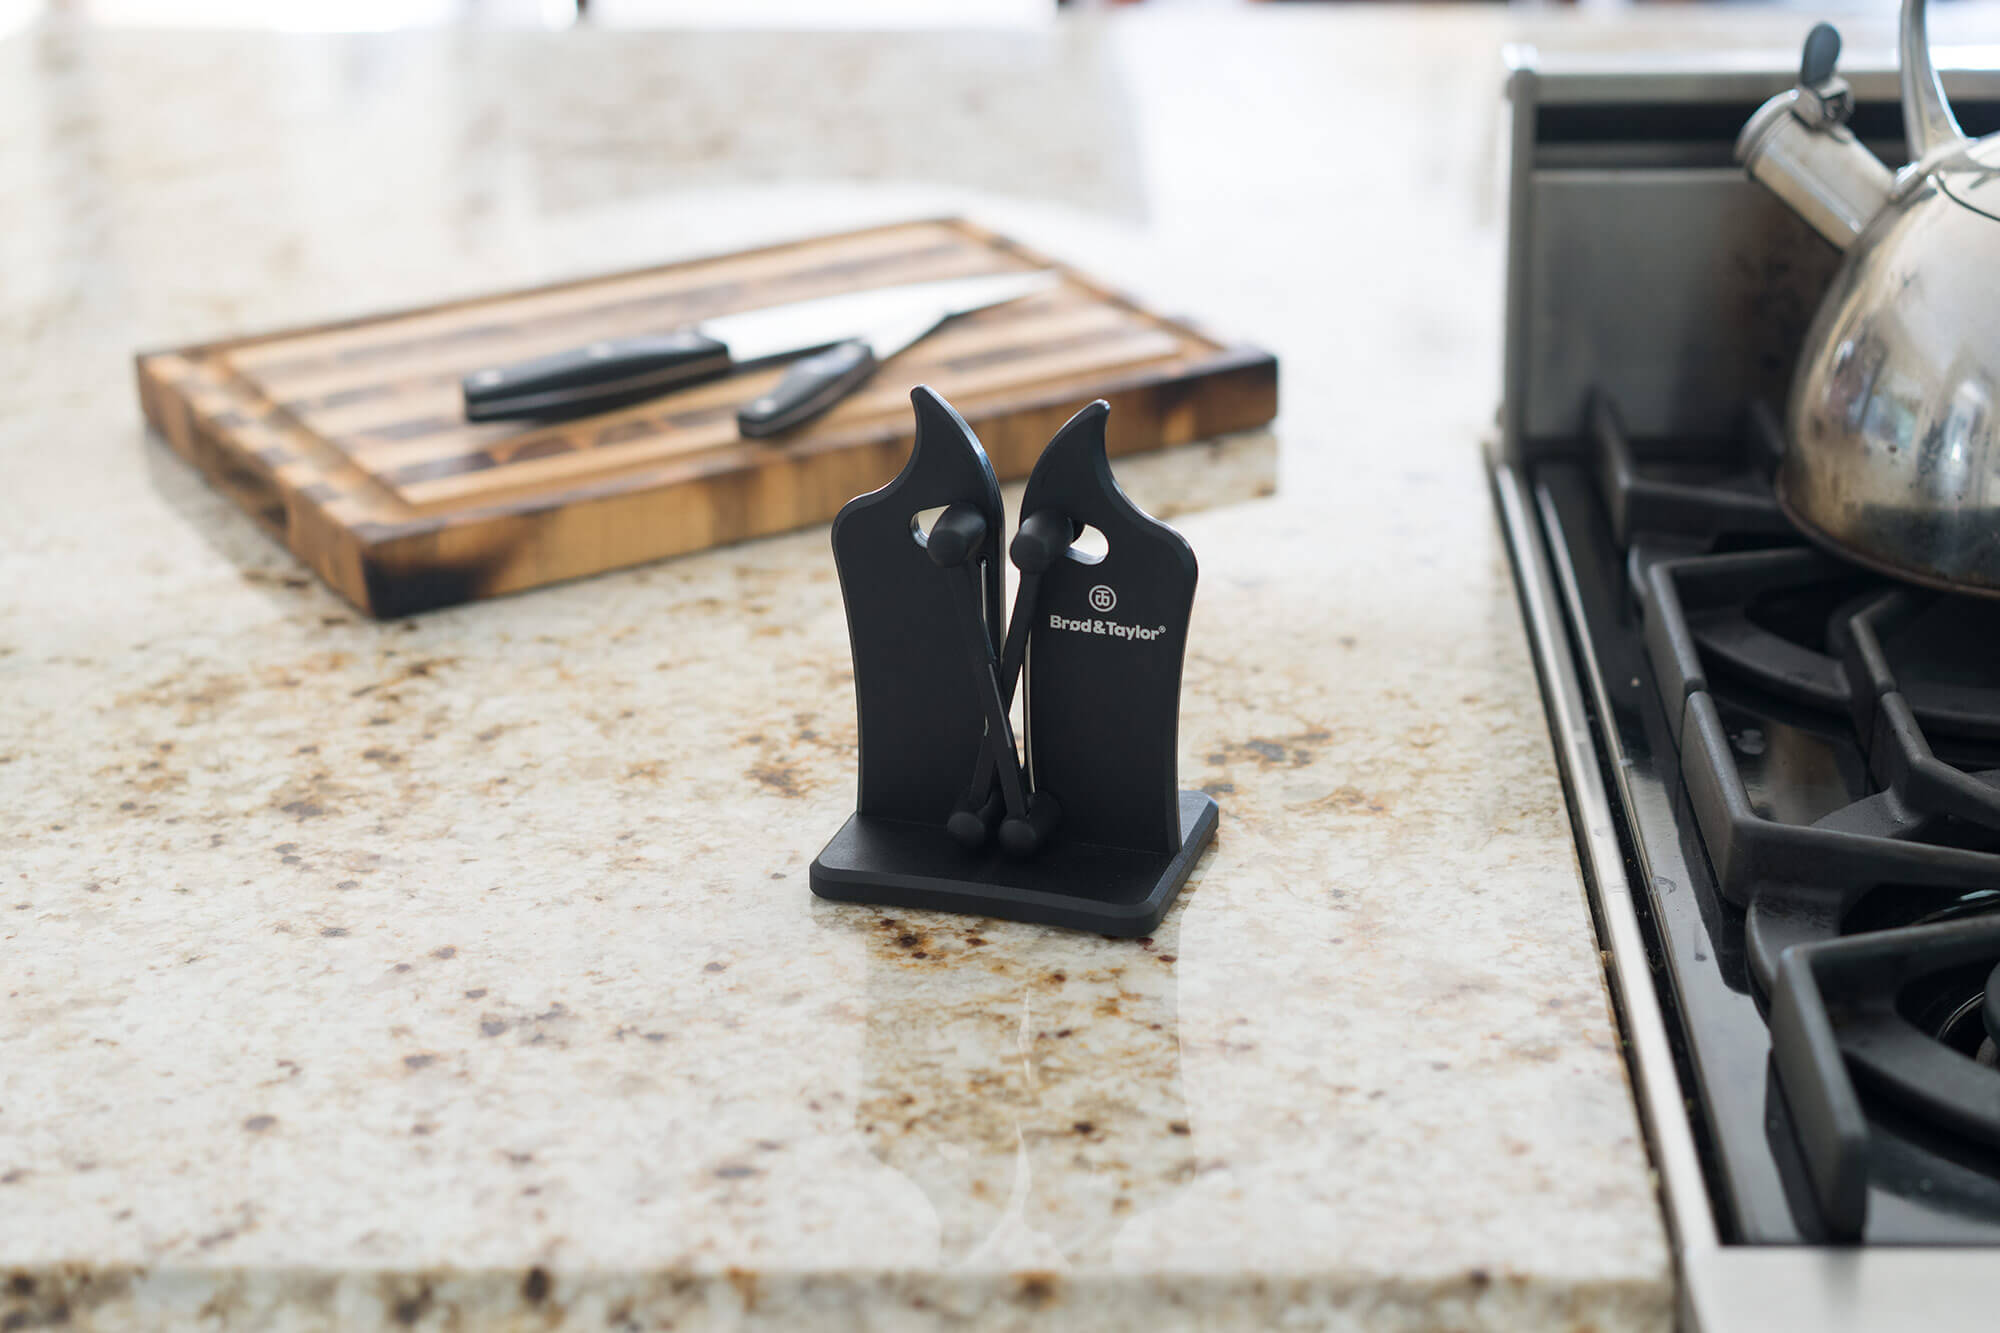 Brod and Taylor Classic Sharpener on countertop